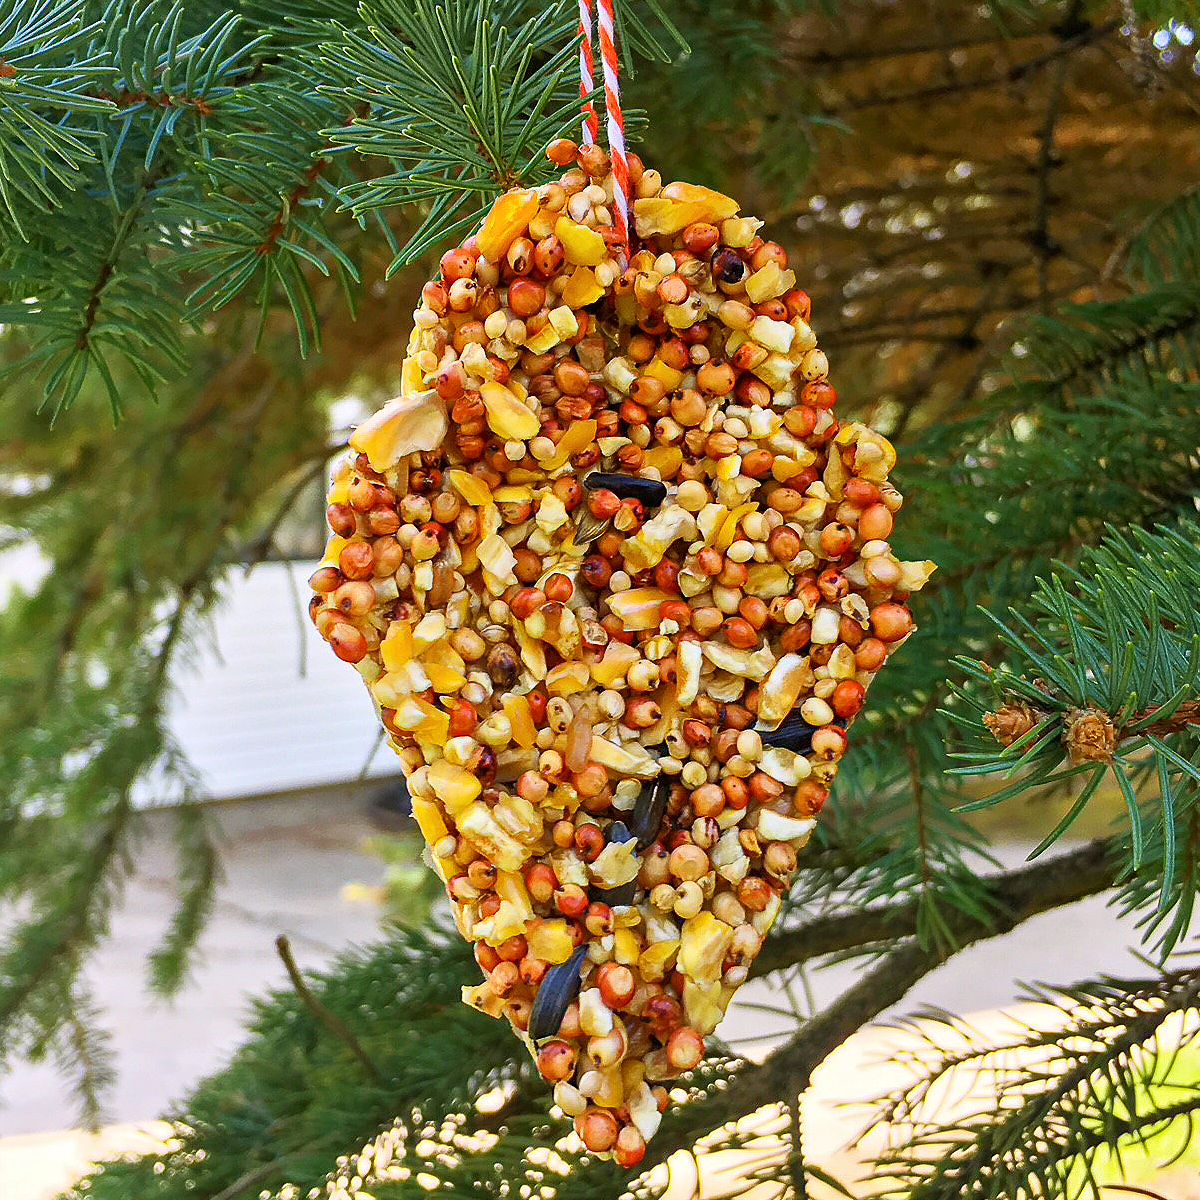 Close up of homemade bird feeder in a tree